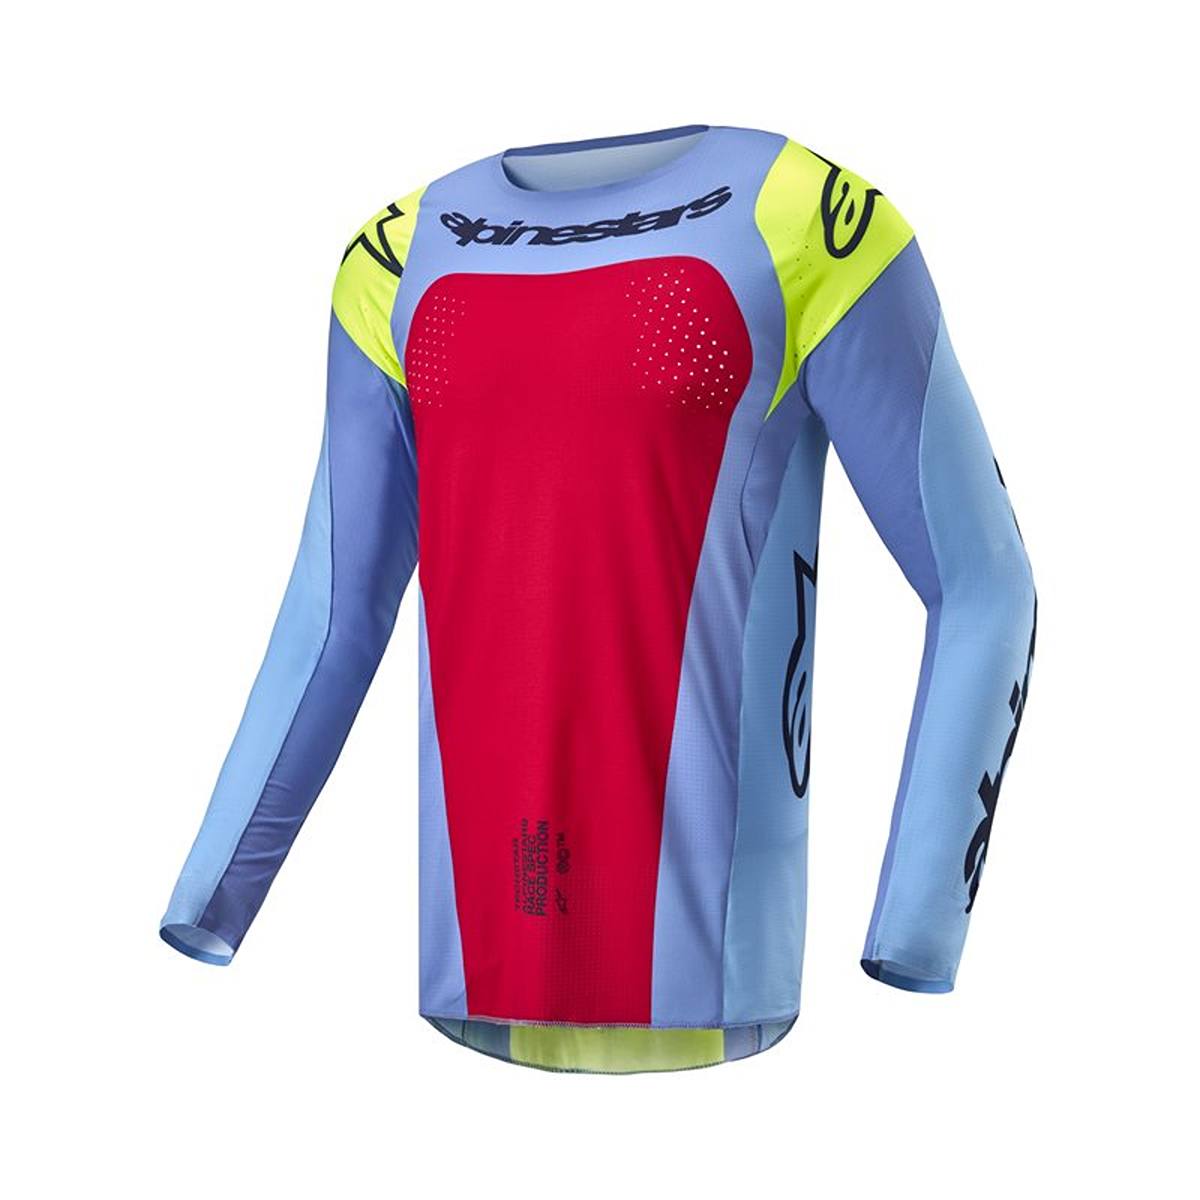 Image of Alpinestars Techstar Ocuri Jersey Light Blue Yellow Fluo Red Berry Taille M